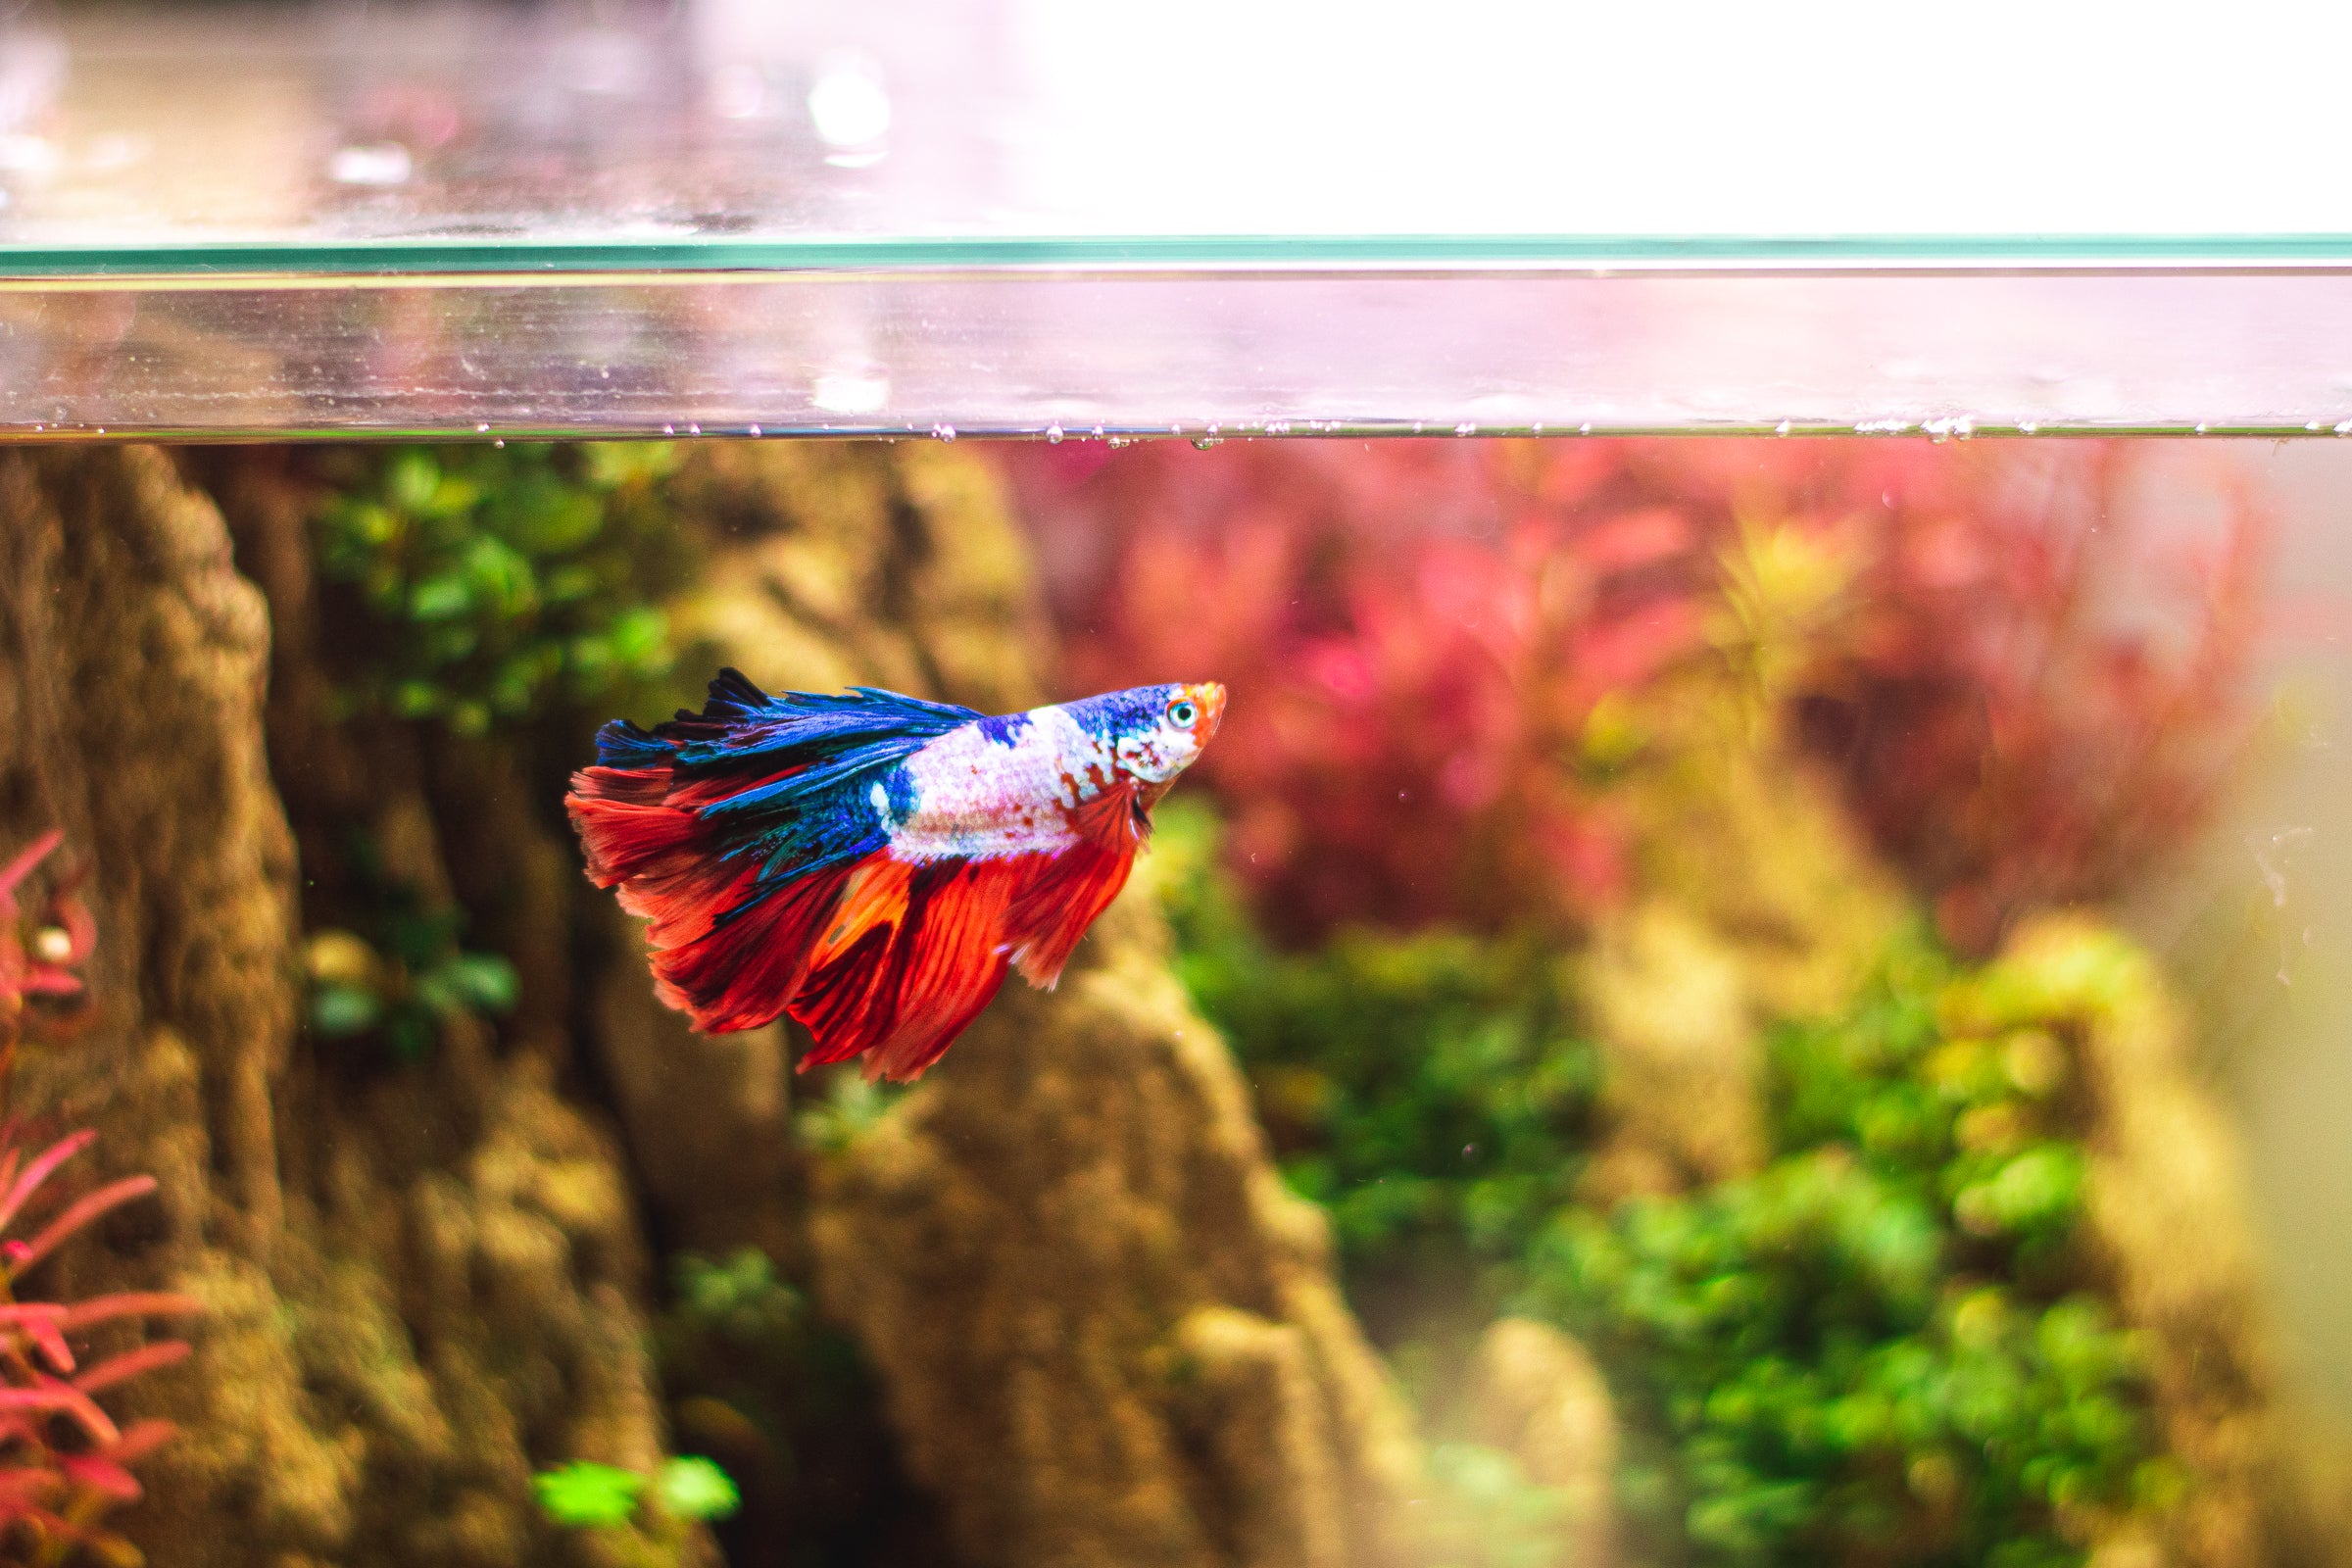 Setting up a Freshwater Aquarium: A Guide for Beginners - PetHelpful